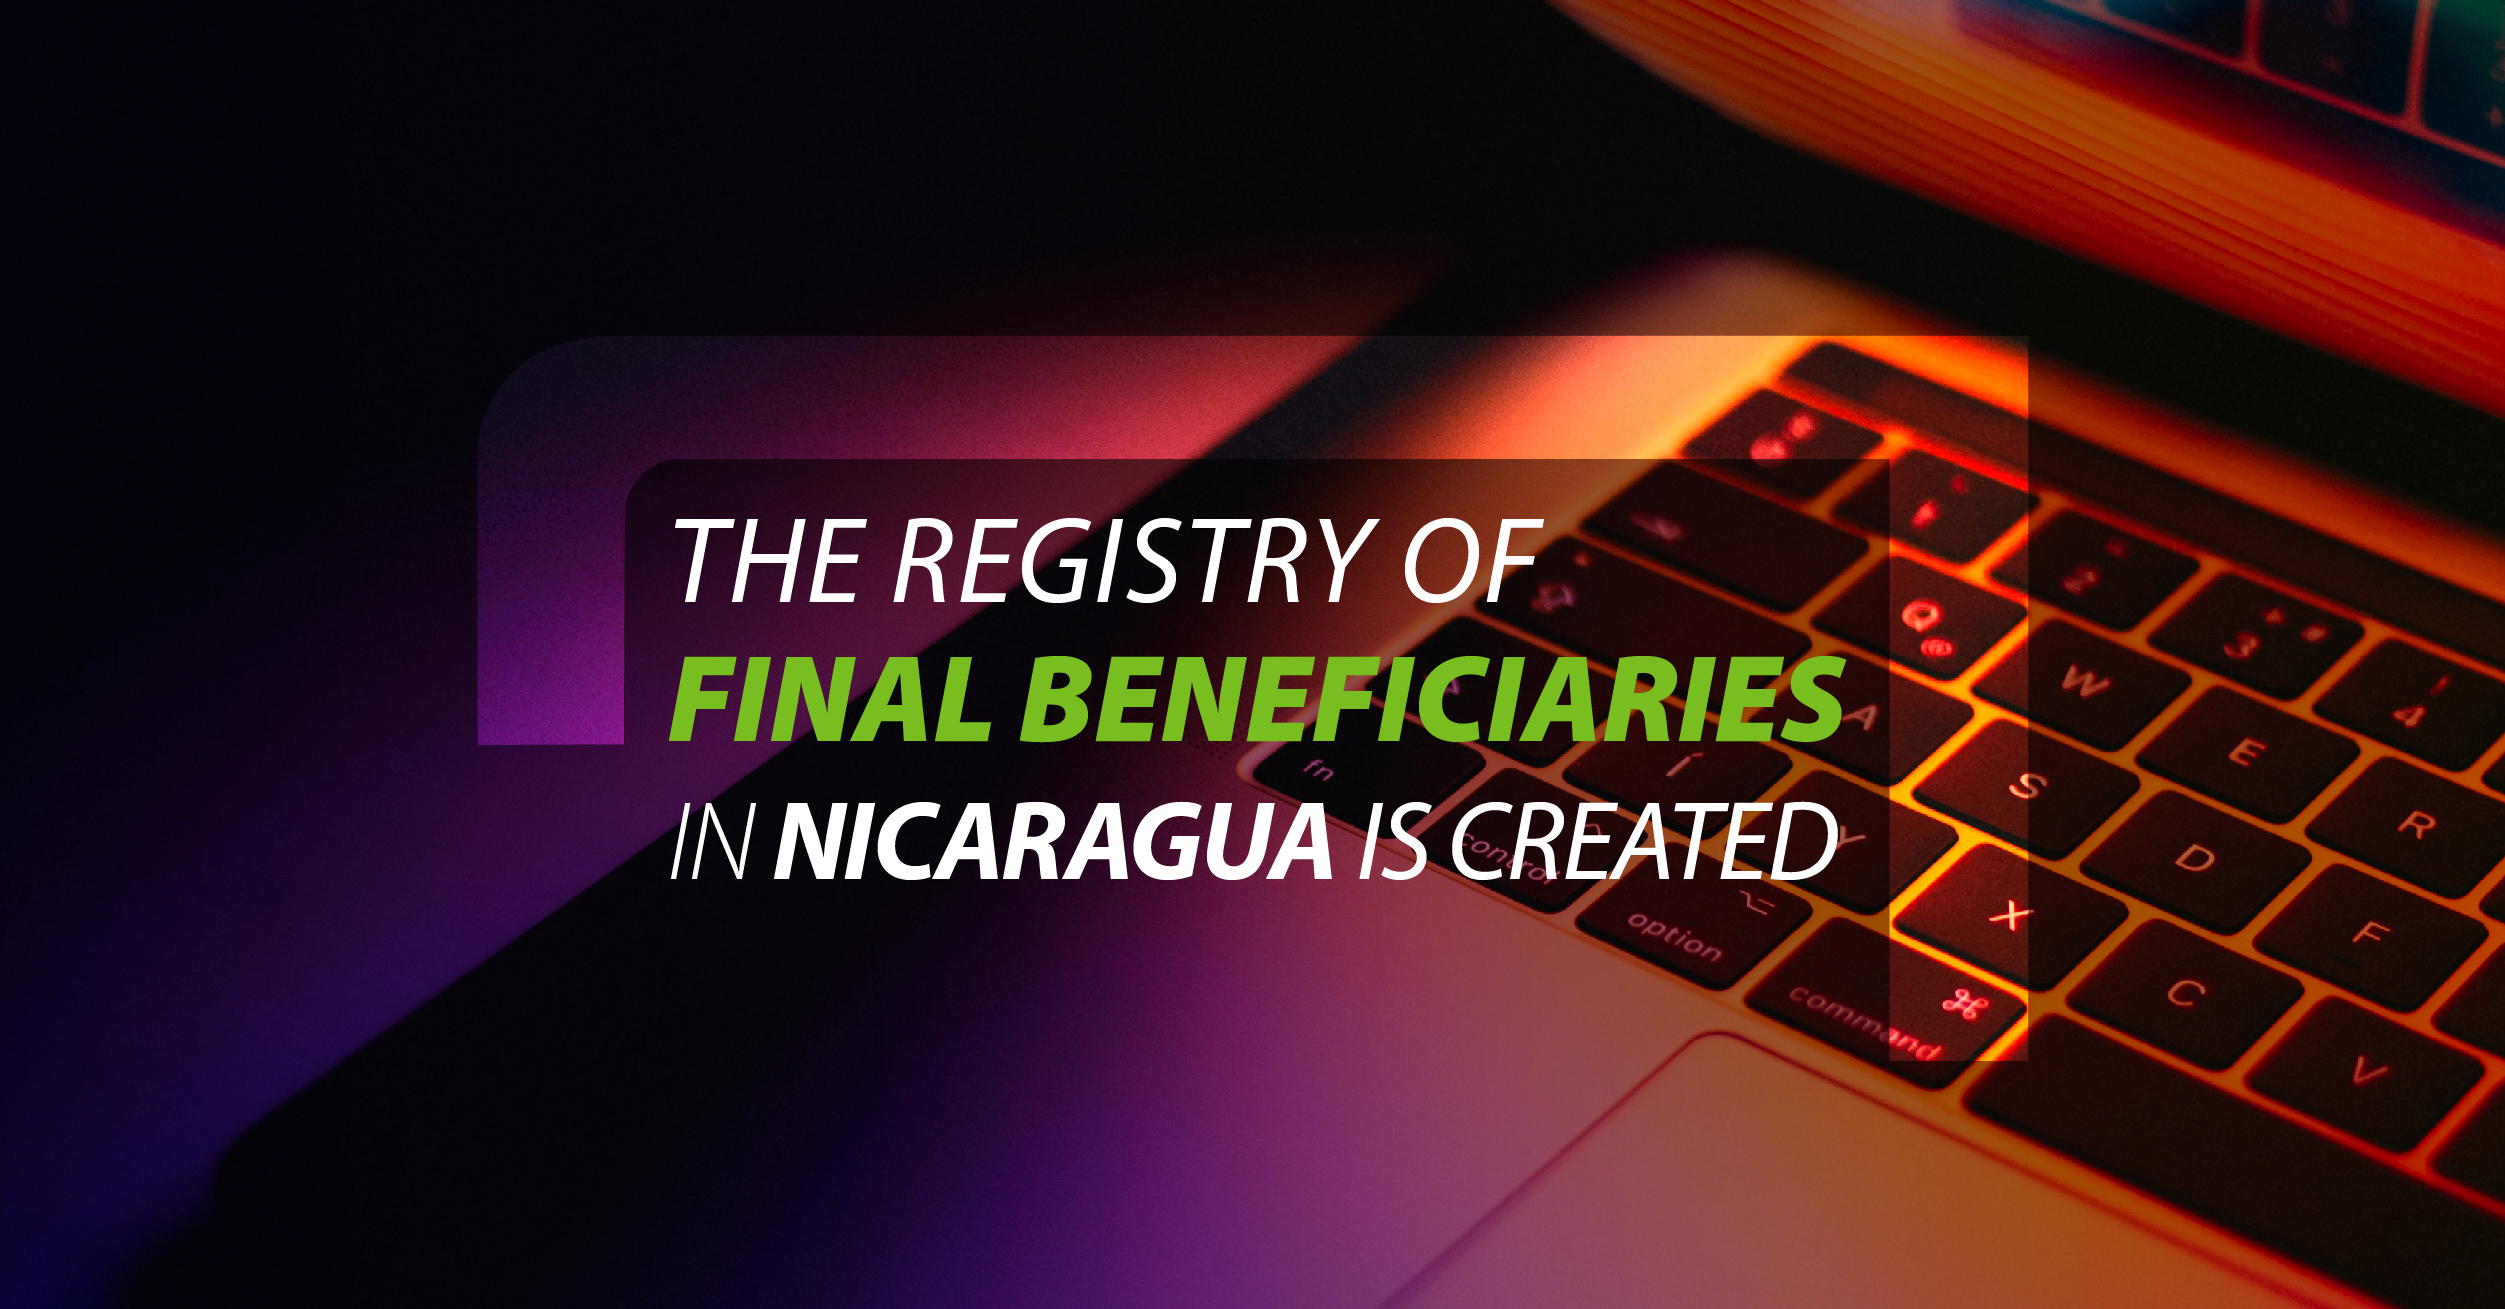 The registry of Final Beneficiaries in Nicaragua is created.